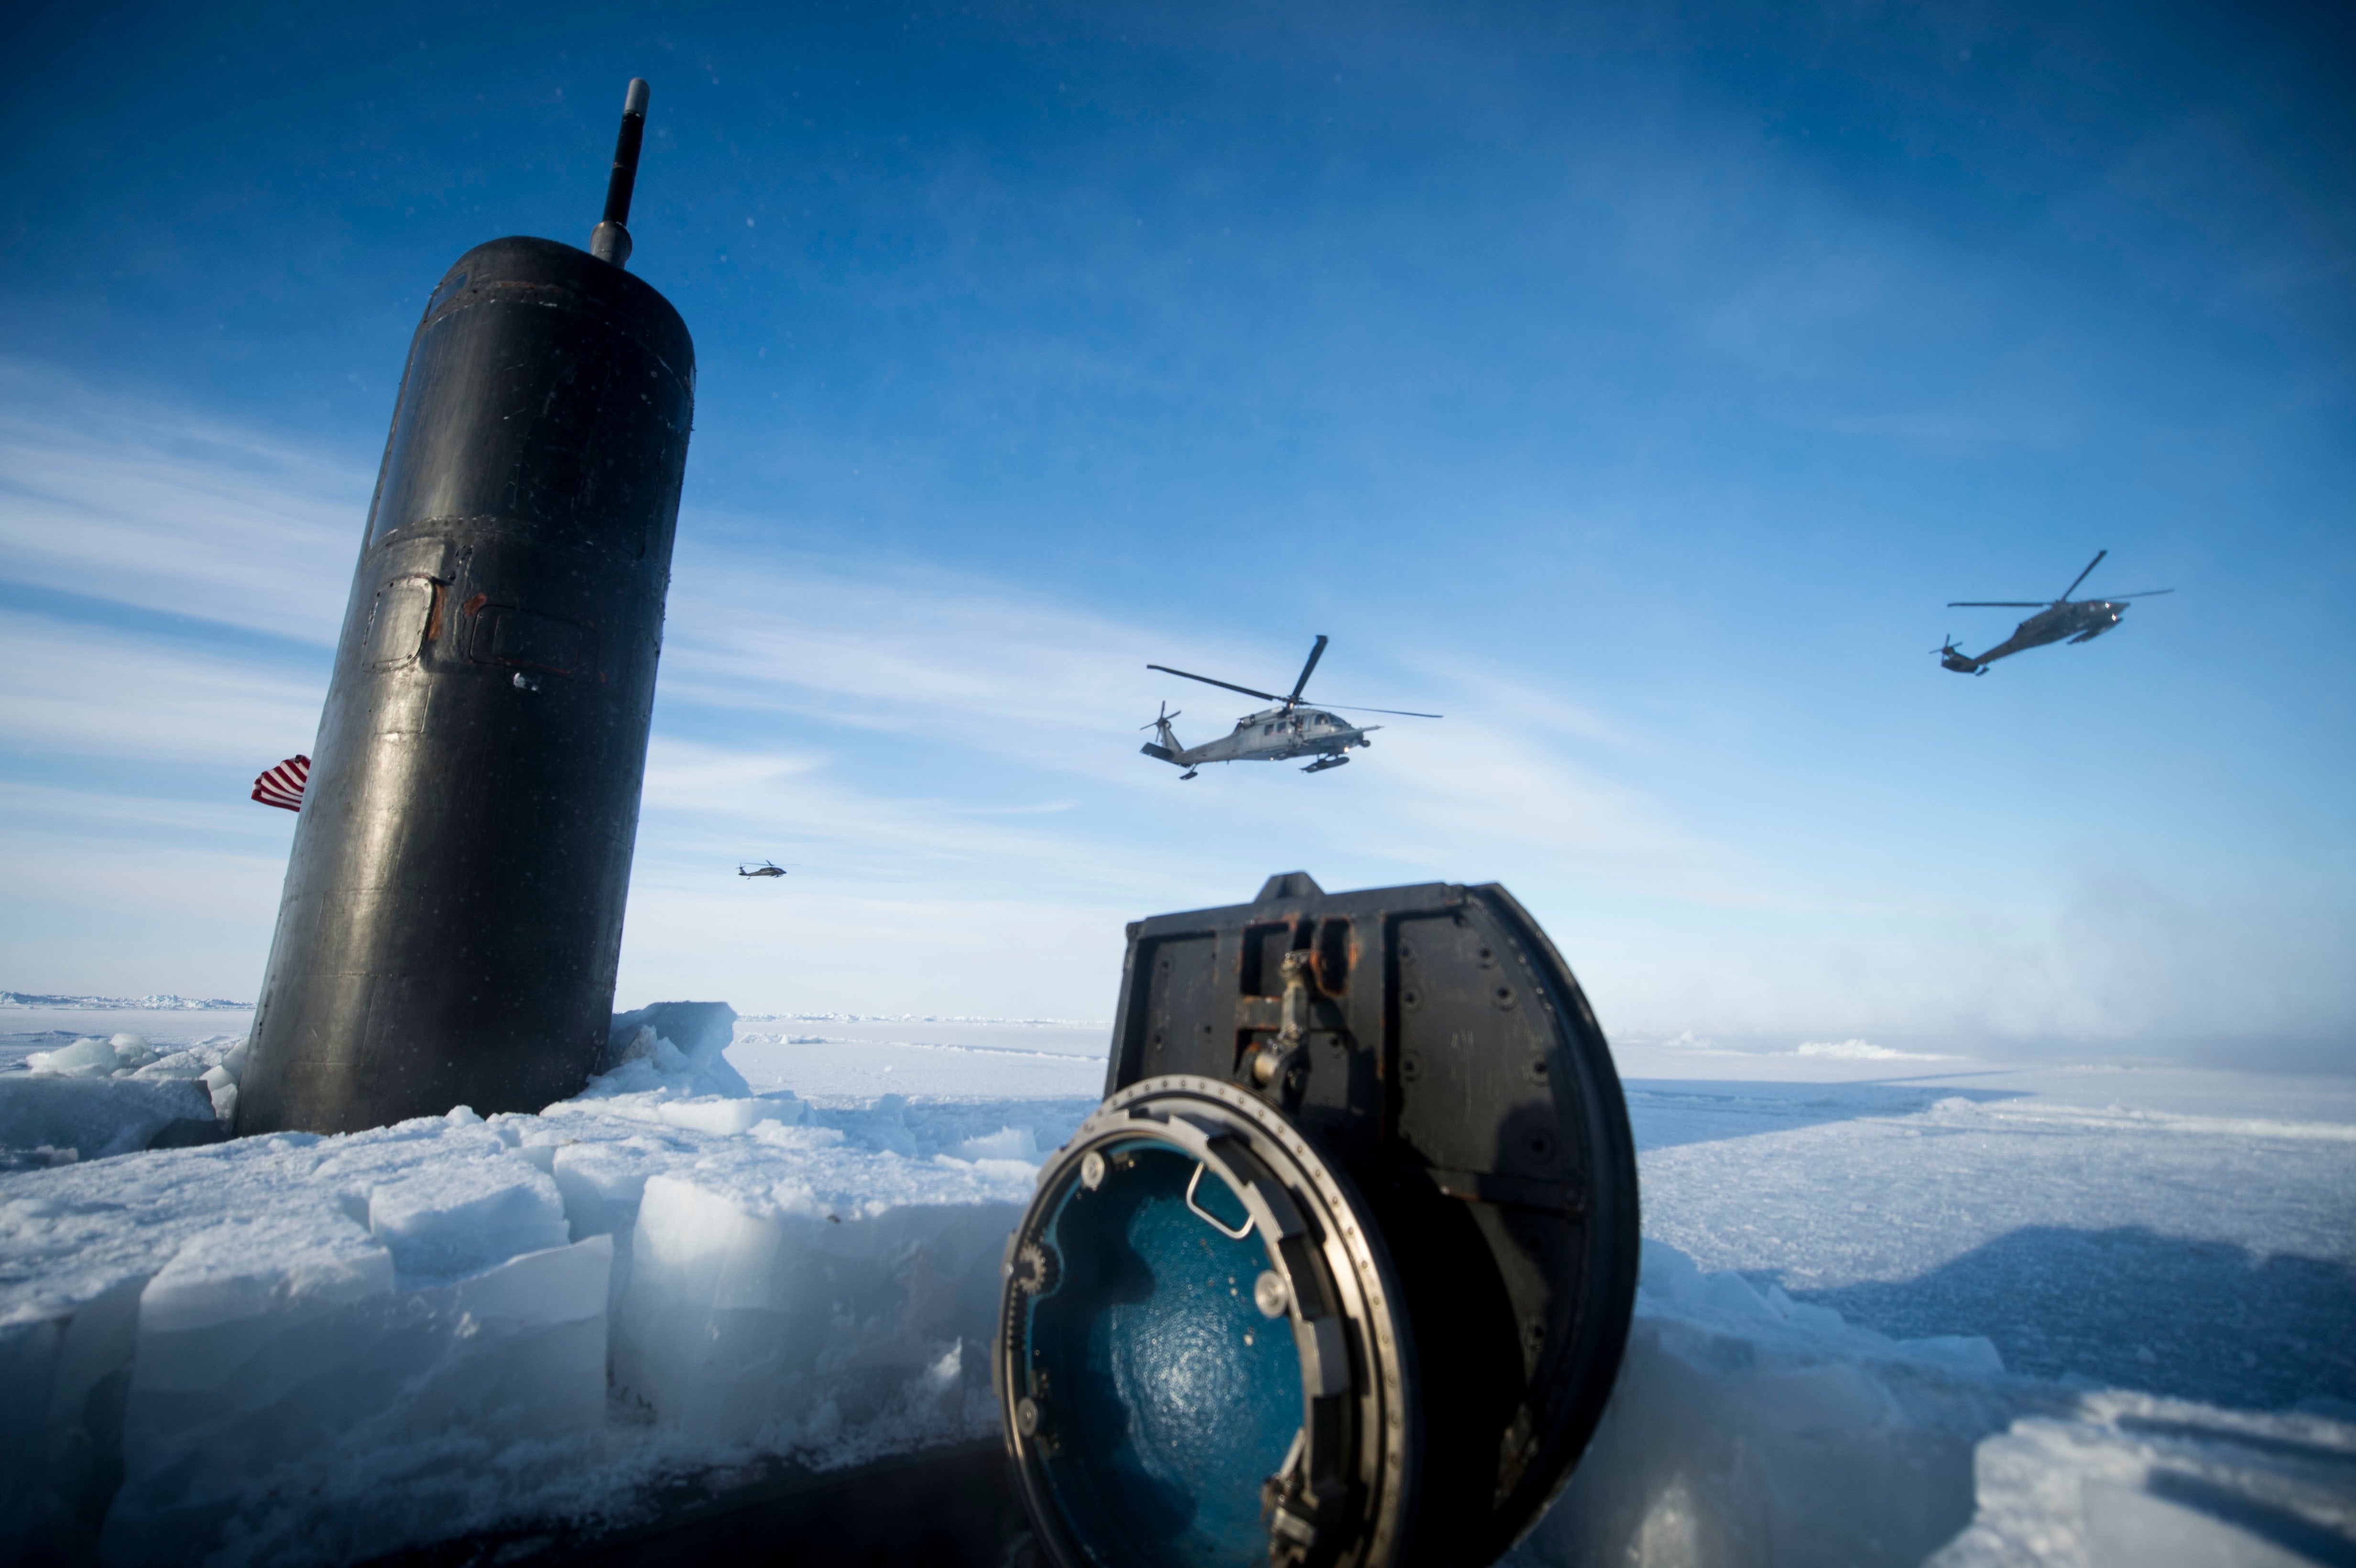 The Possibility Of Russians Using Tactical Nukes and the Strategic Importance Of The Arctic